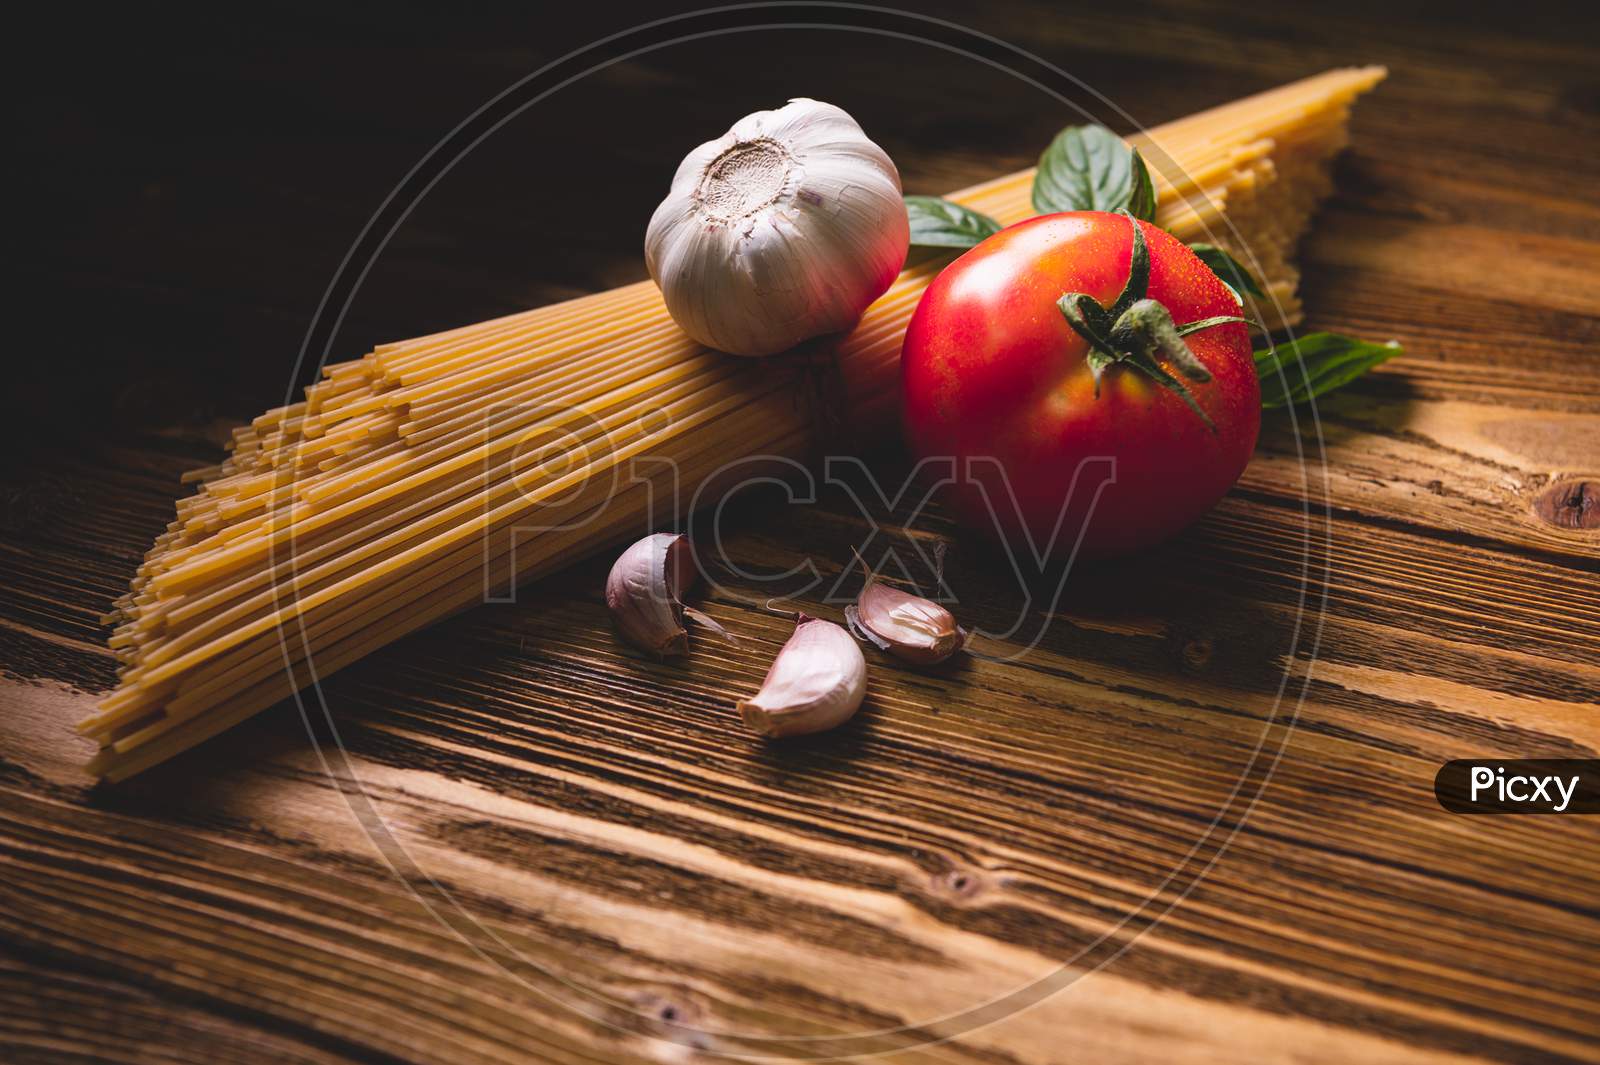 Tasty Appetizing Italian Spaghetti Pasta Ingredients For Kitchen Cuisine With Tomato, Garlic And Basil On Wooden Brown Table. Food Meal And Italian Recipe Homemade. Top View Abgle Above